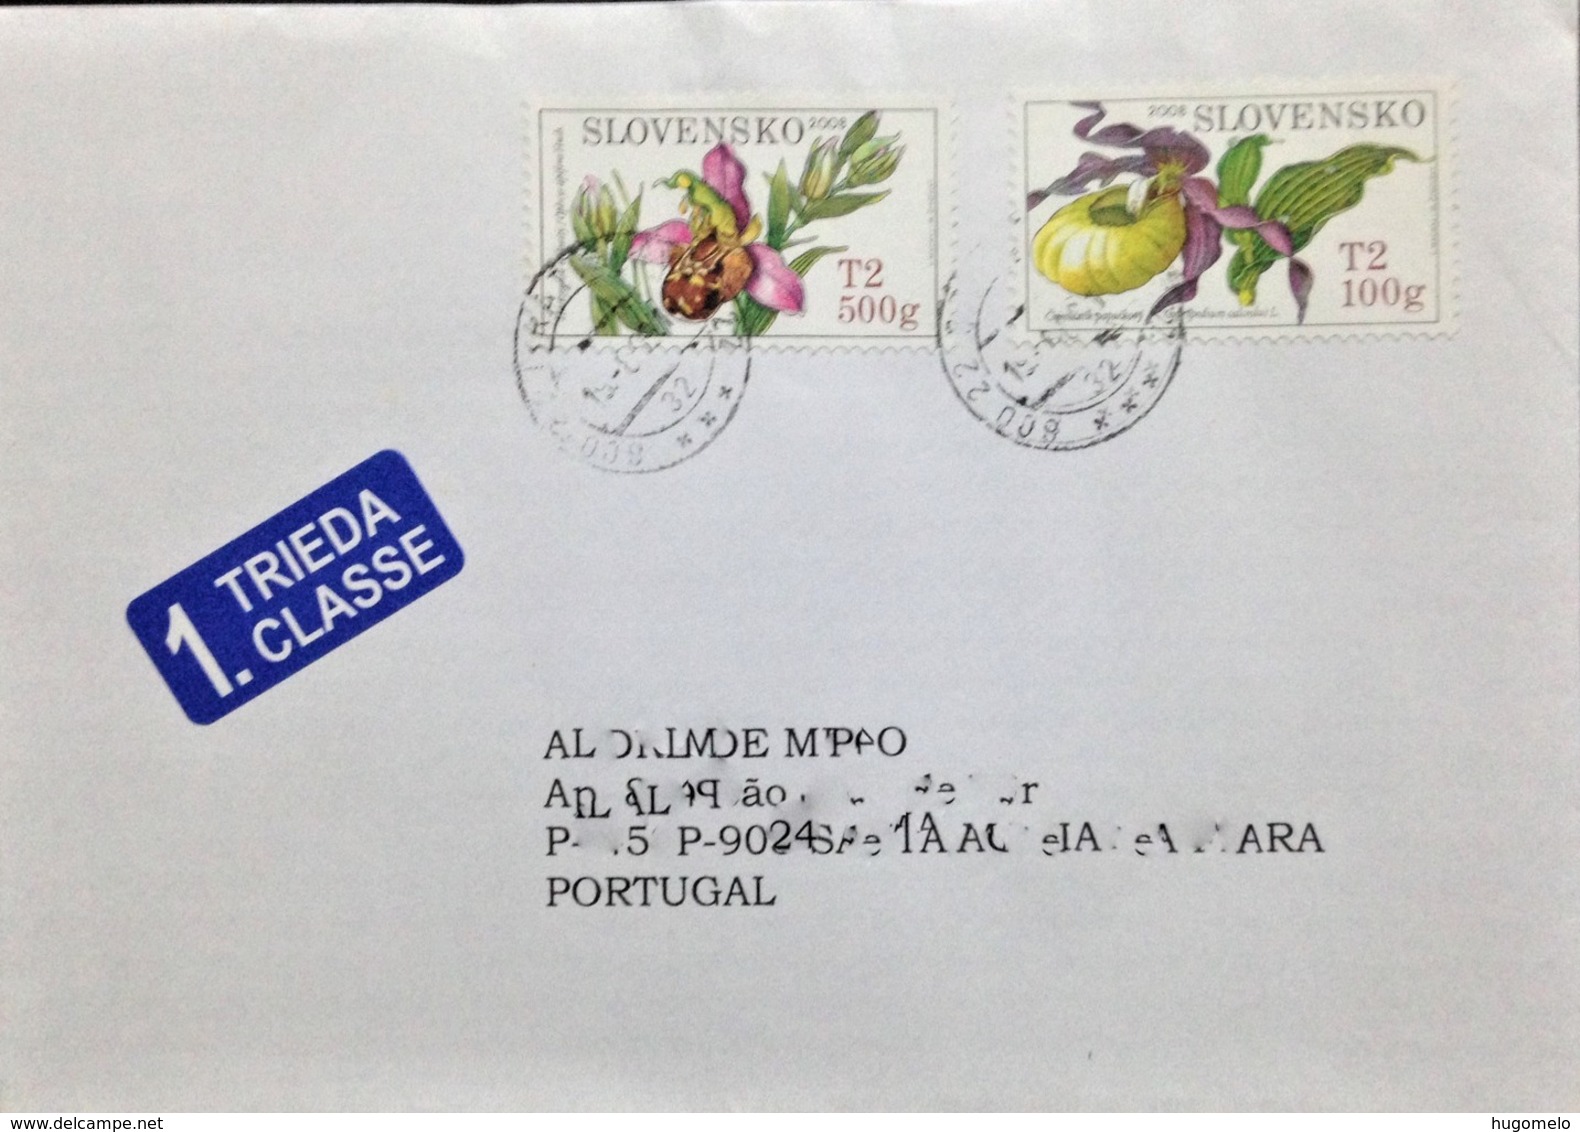 Slovakia, Circulated Cover To Portugal, "Nature", "Flora", Flowers", "Orchids", 2009 - Storia Postale